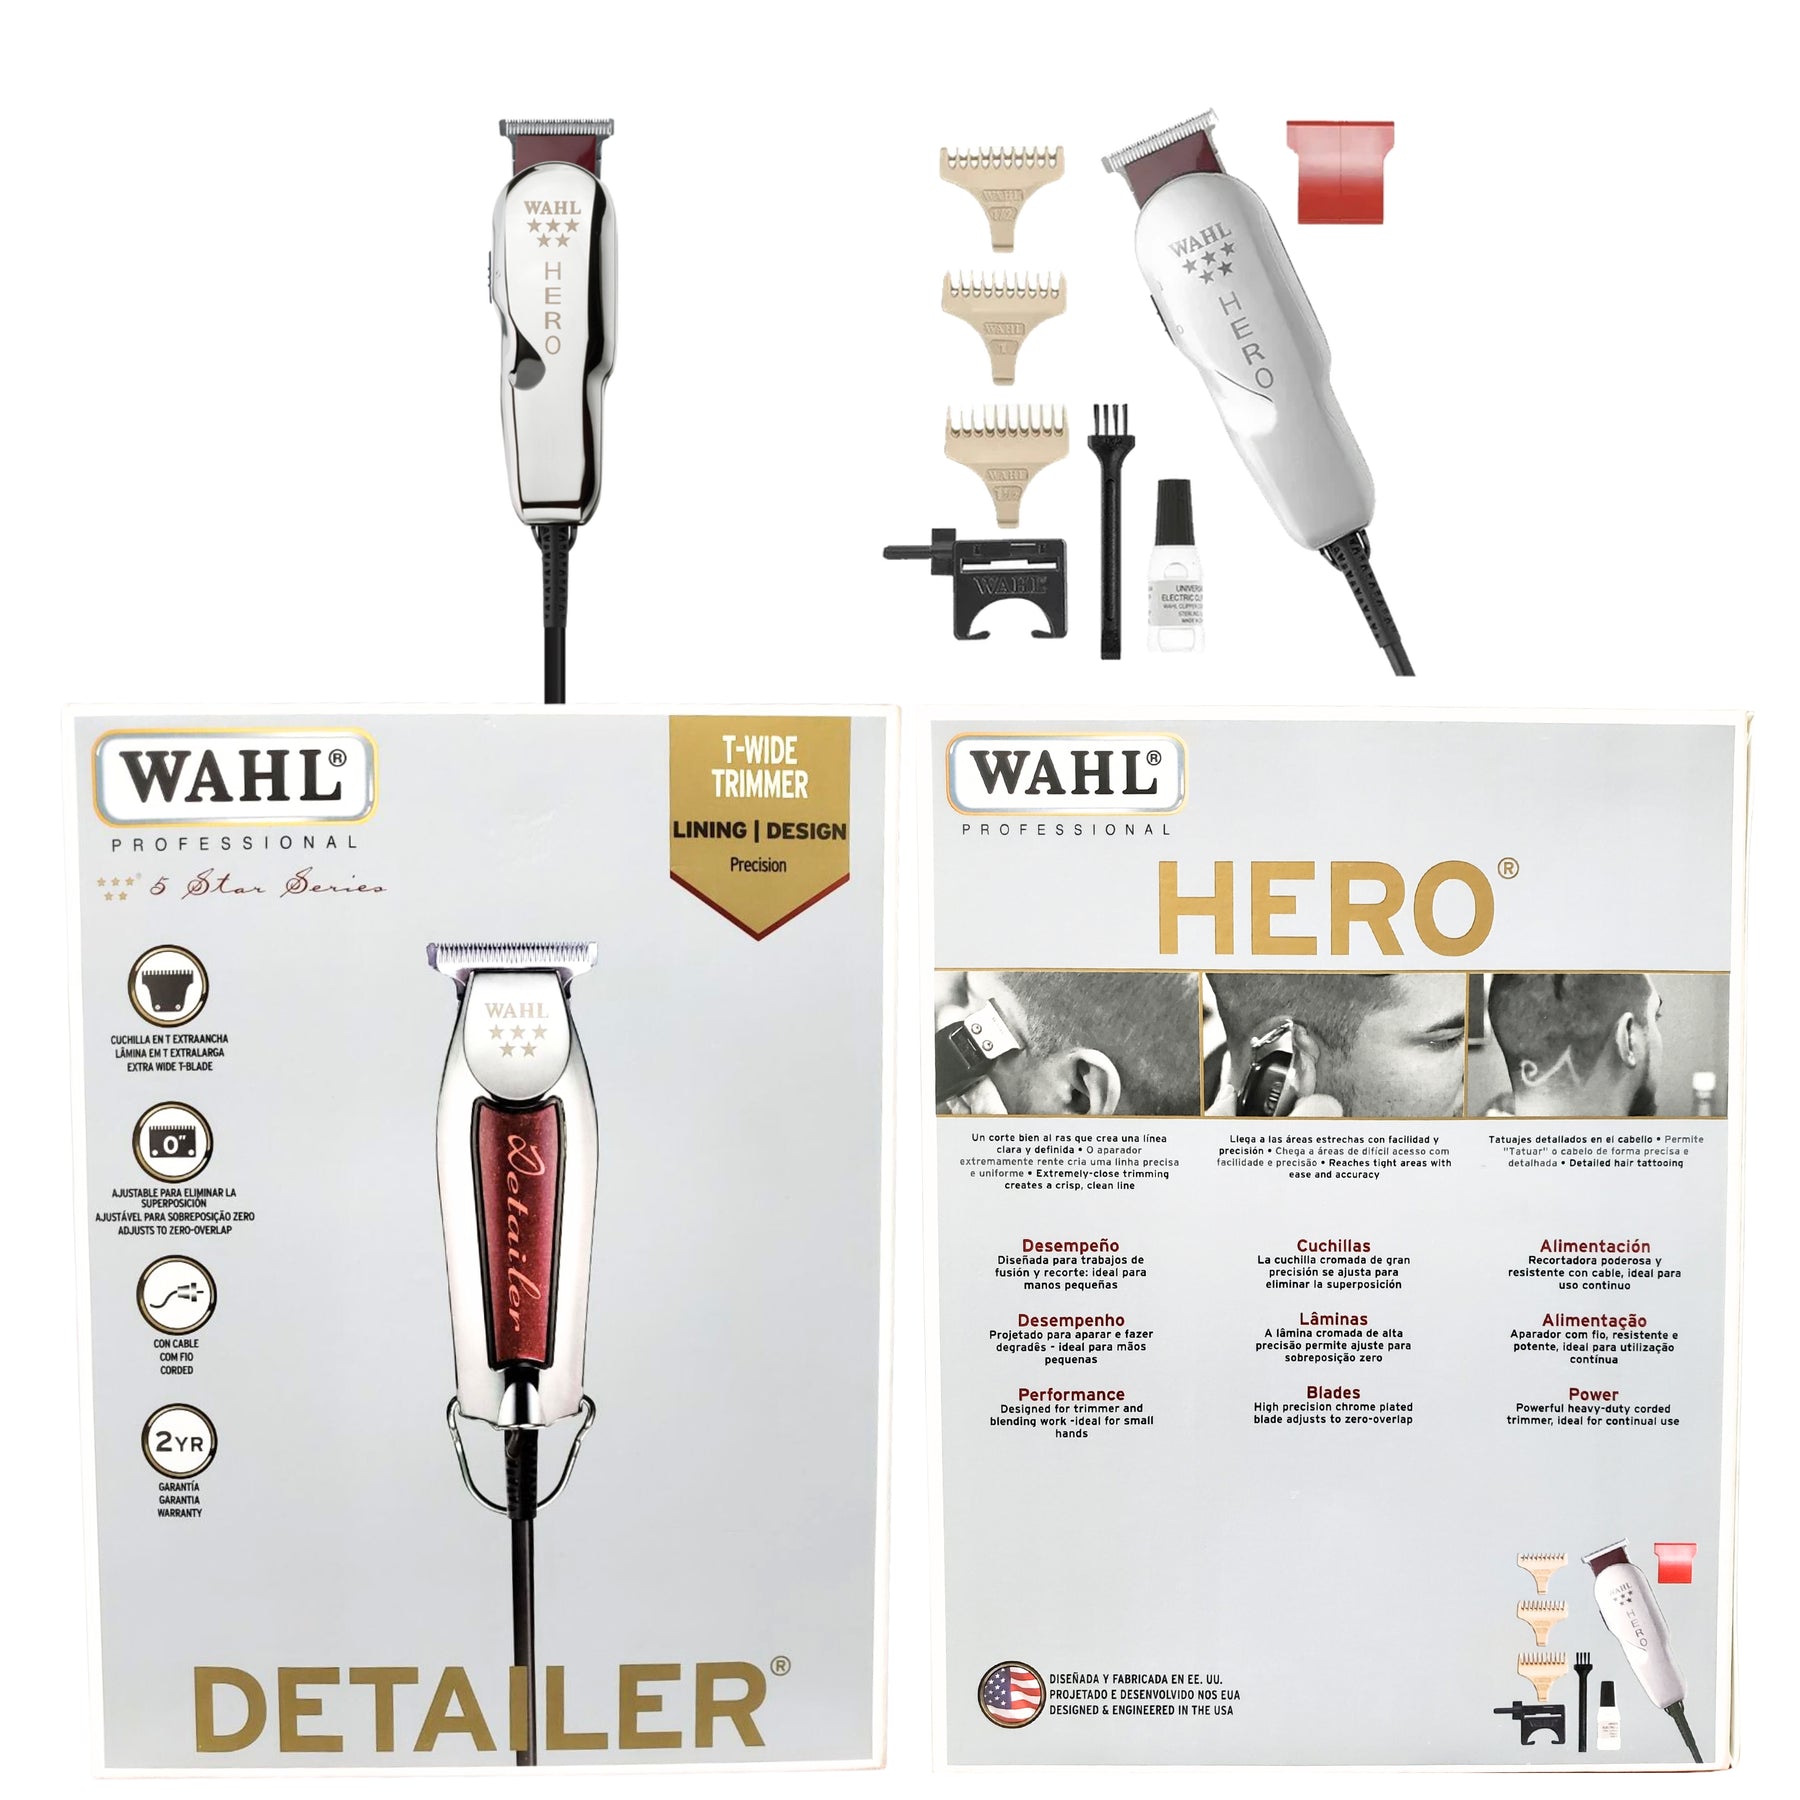 Equipo - Wahl Professional 5 Star Detailer T-Wide Trimmer